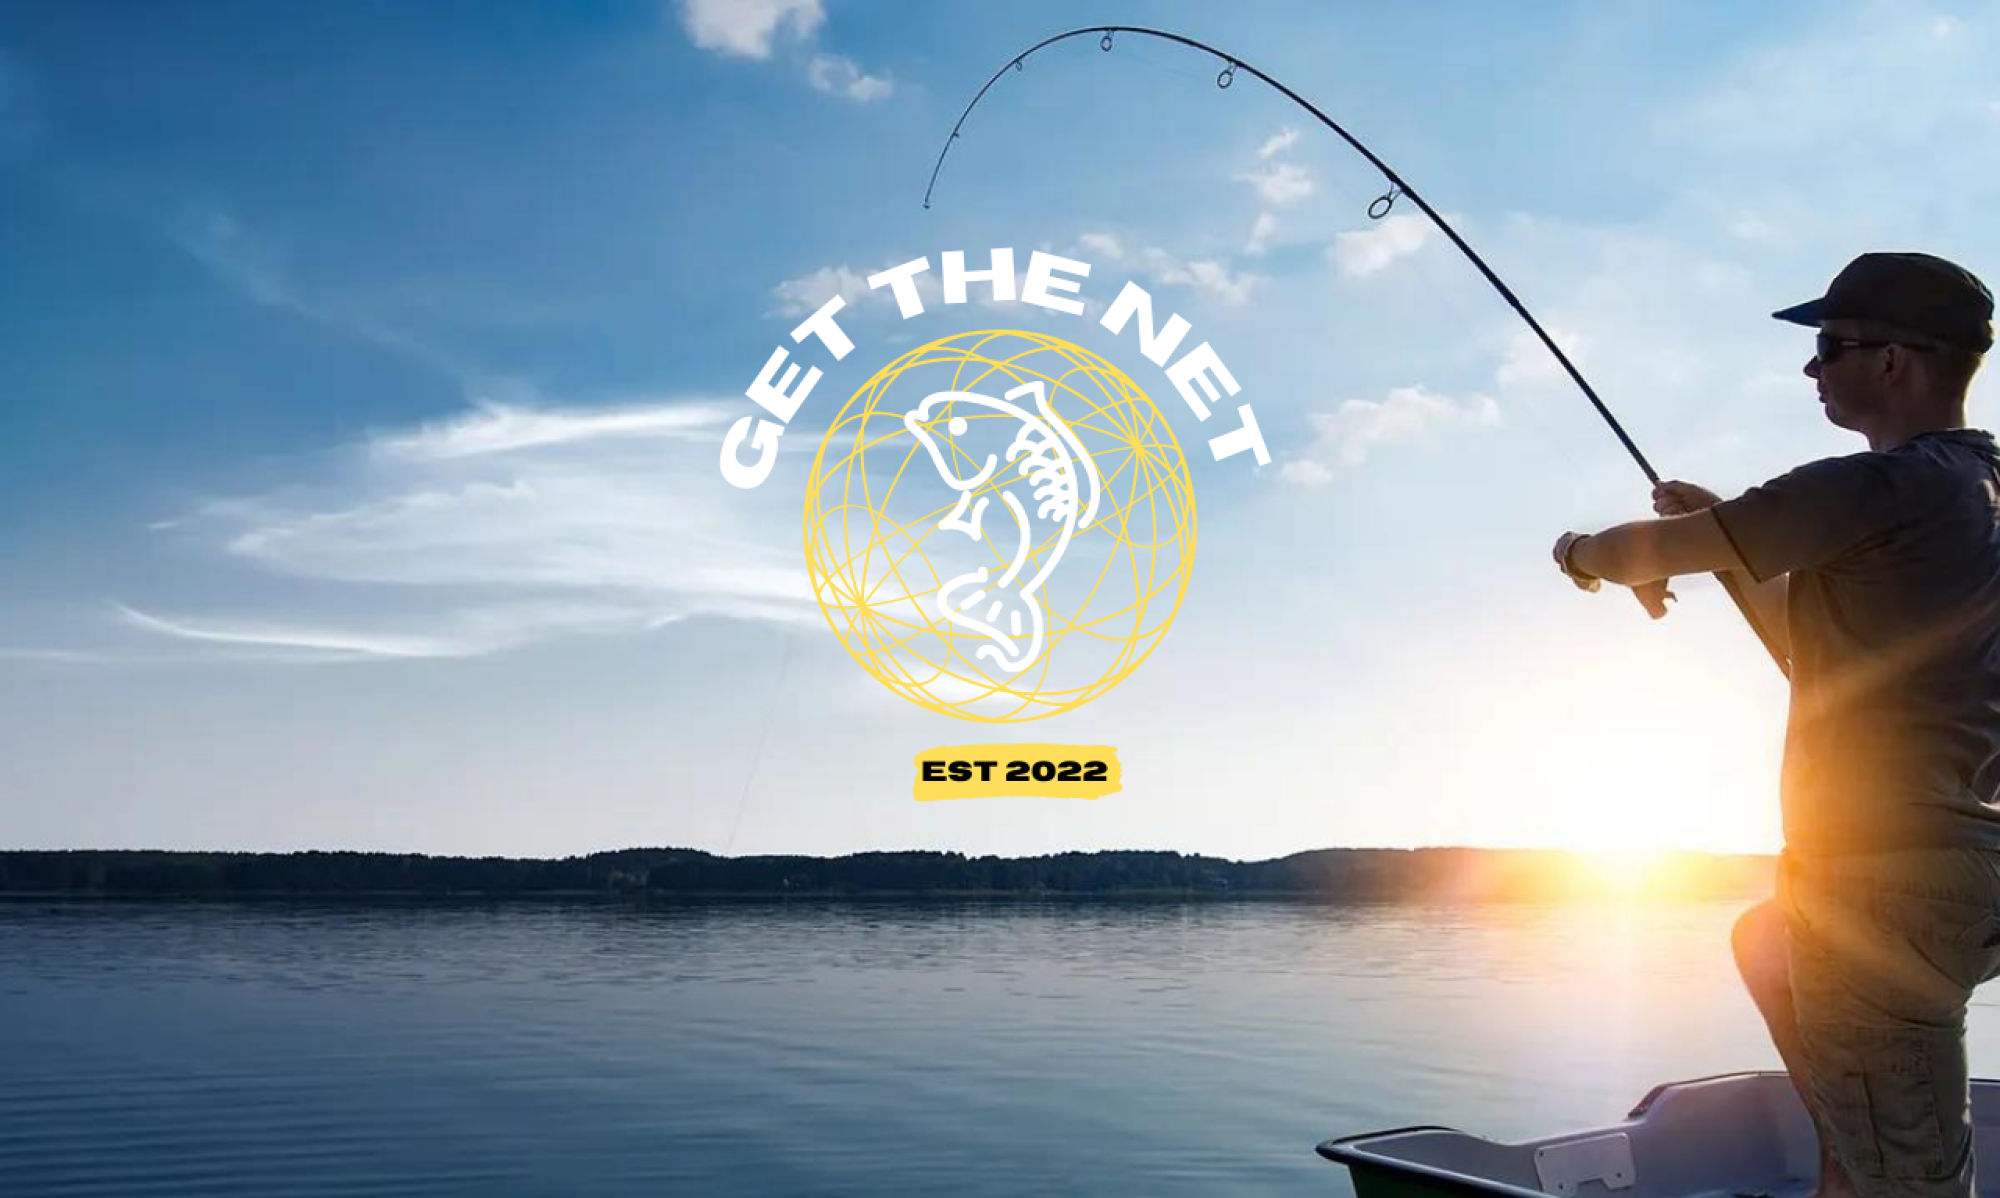 Get The Net! – Welcome To the Get The net webpage. We will be